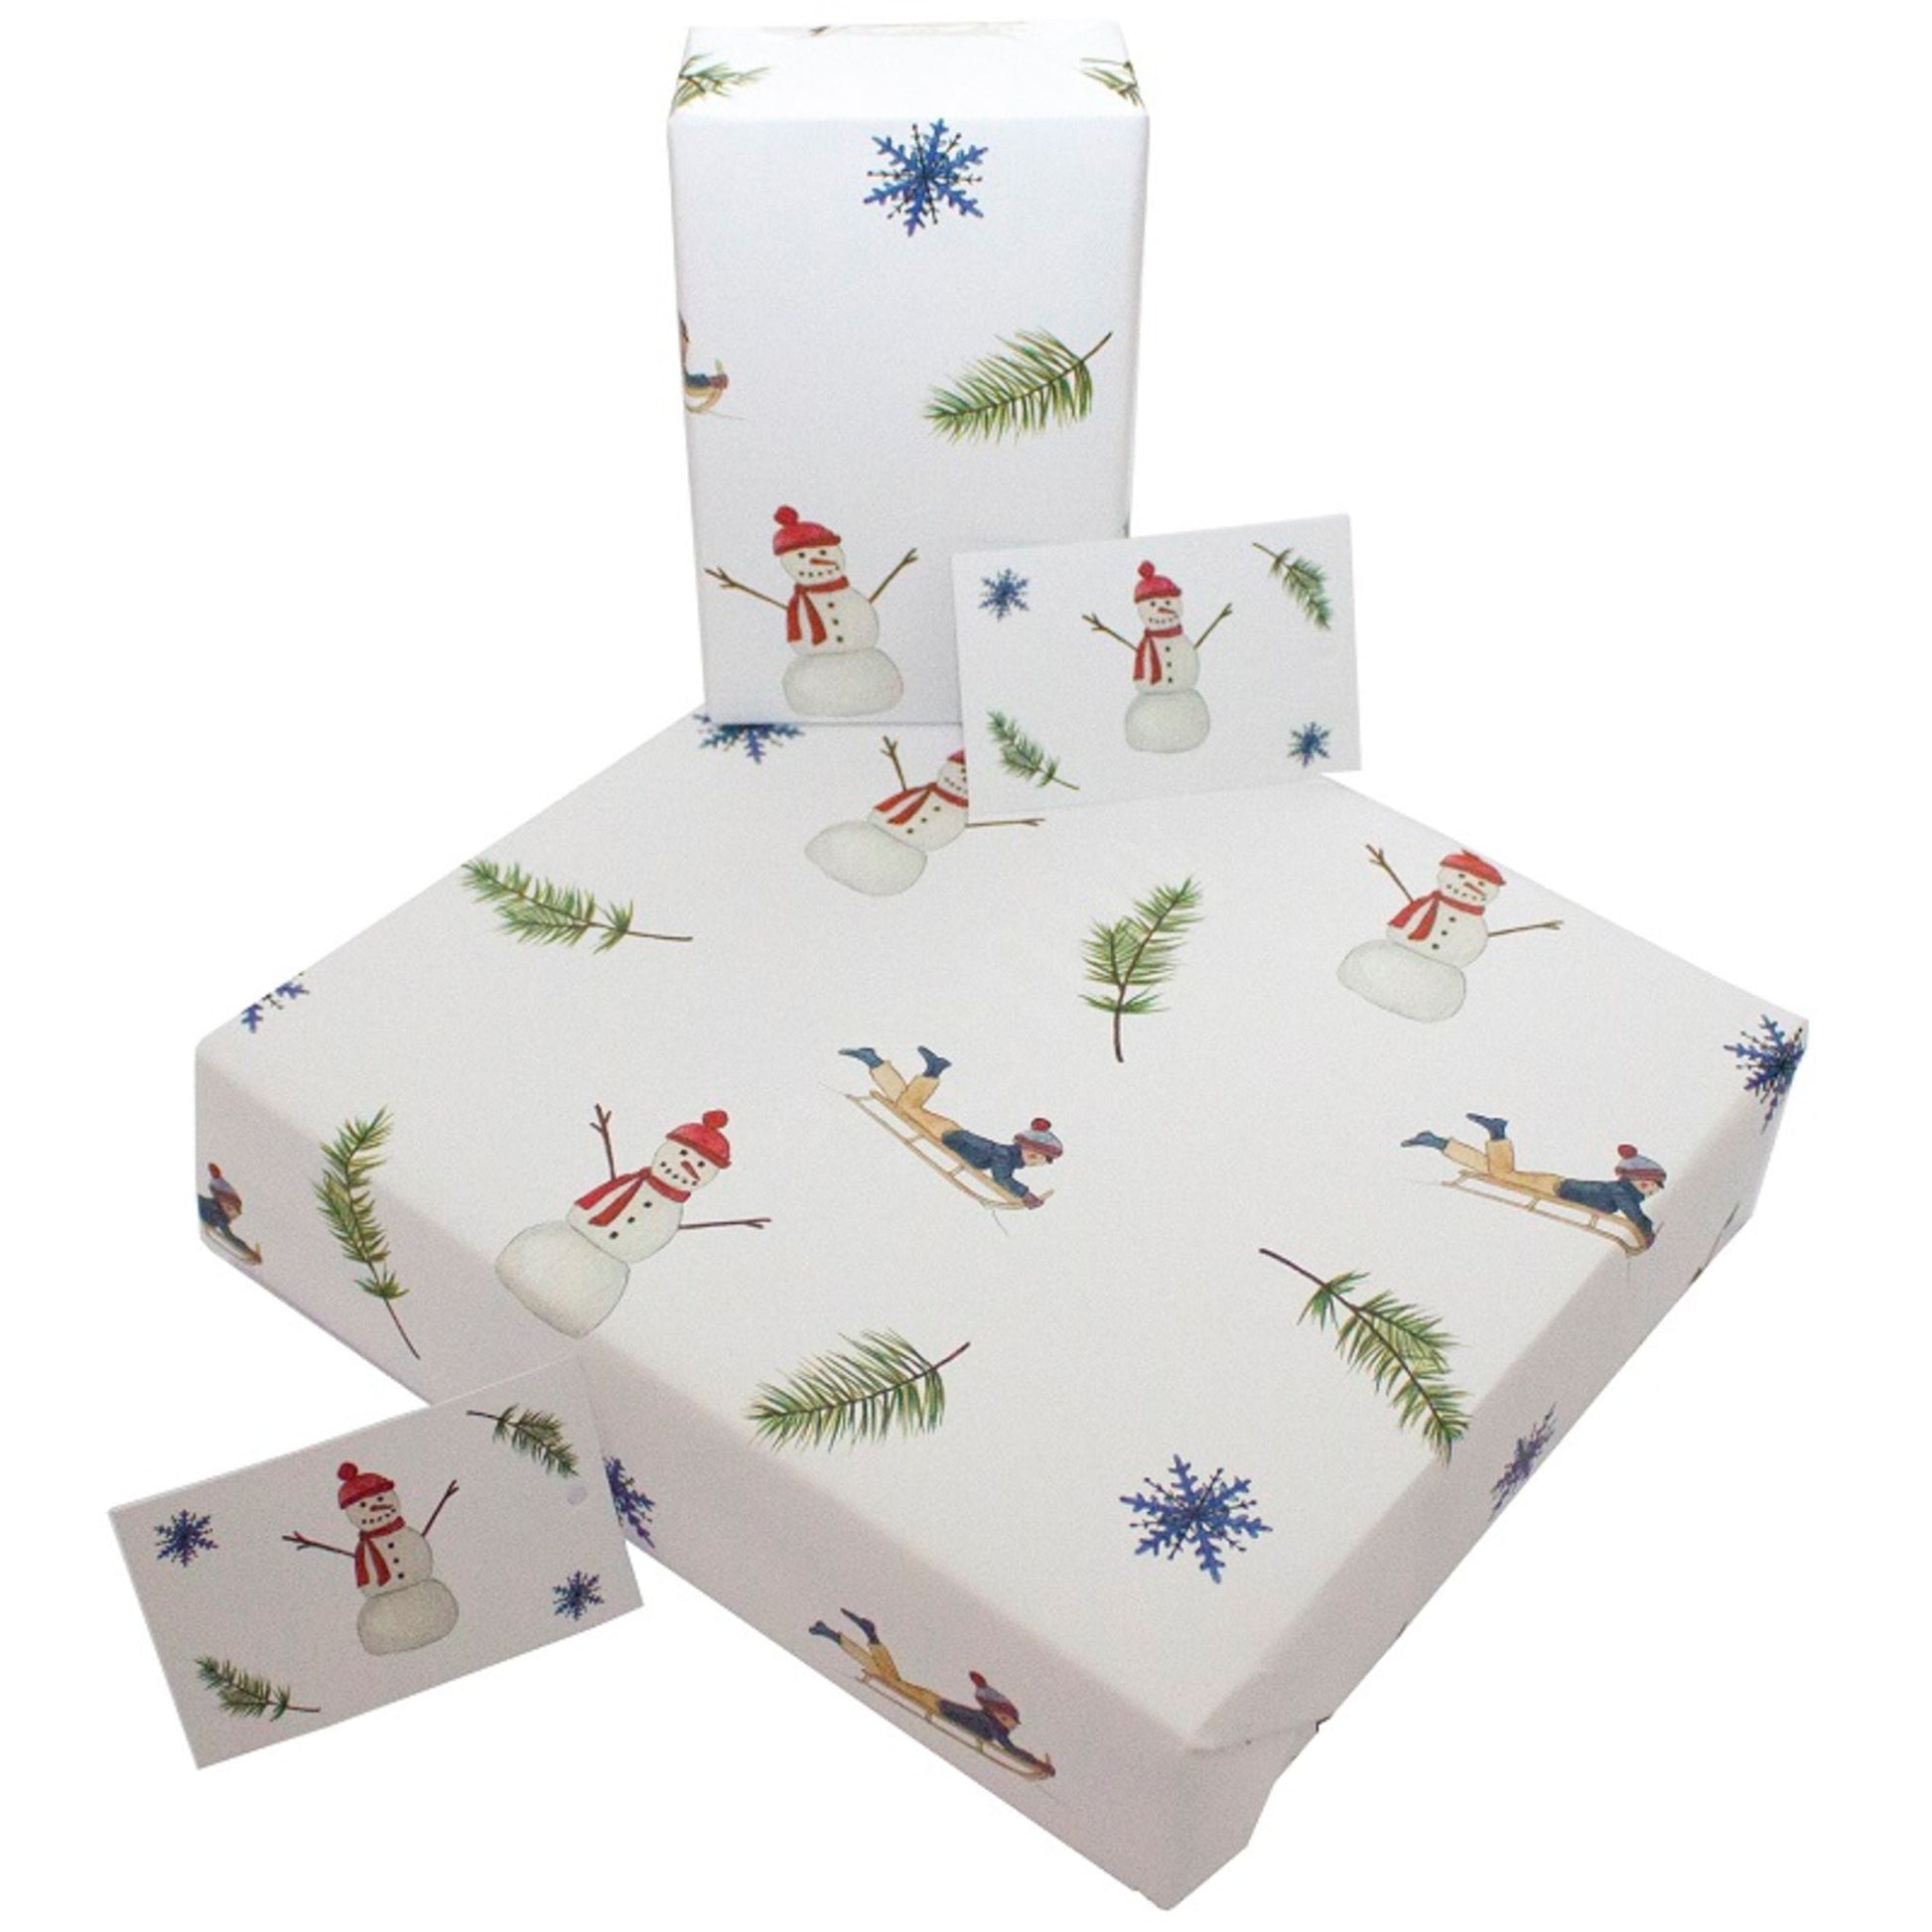 Recycled Christmas wrapping paper - Christmas snowmen